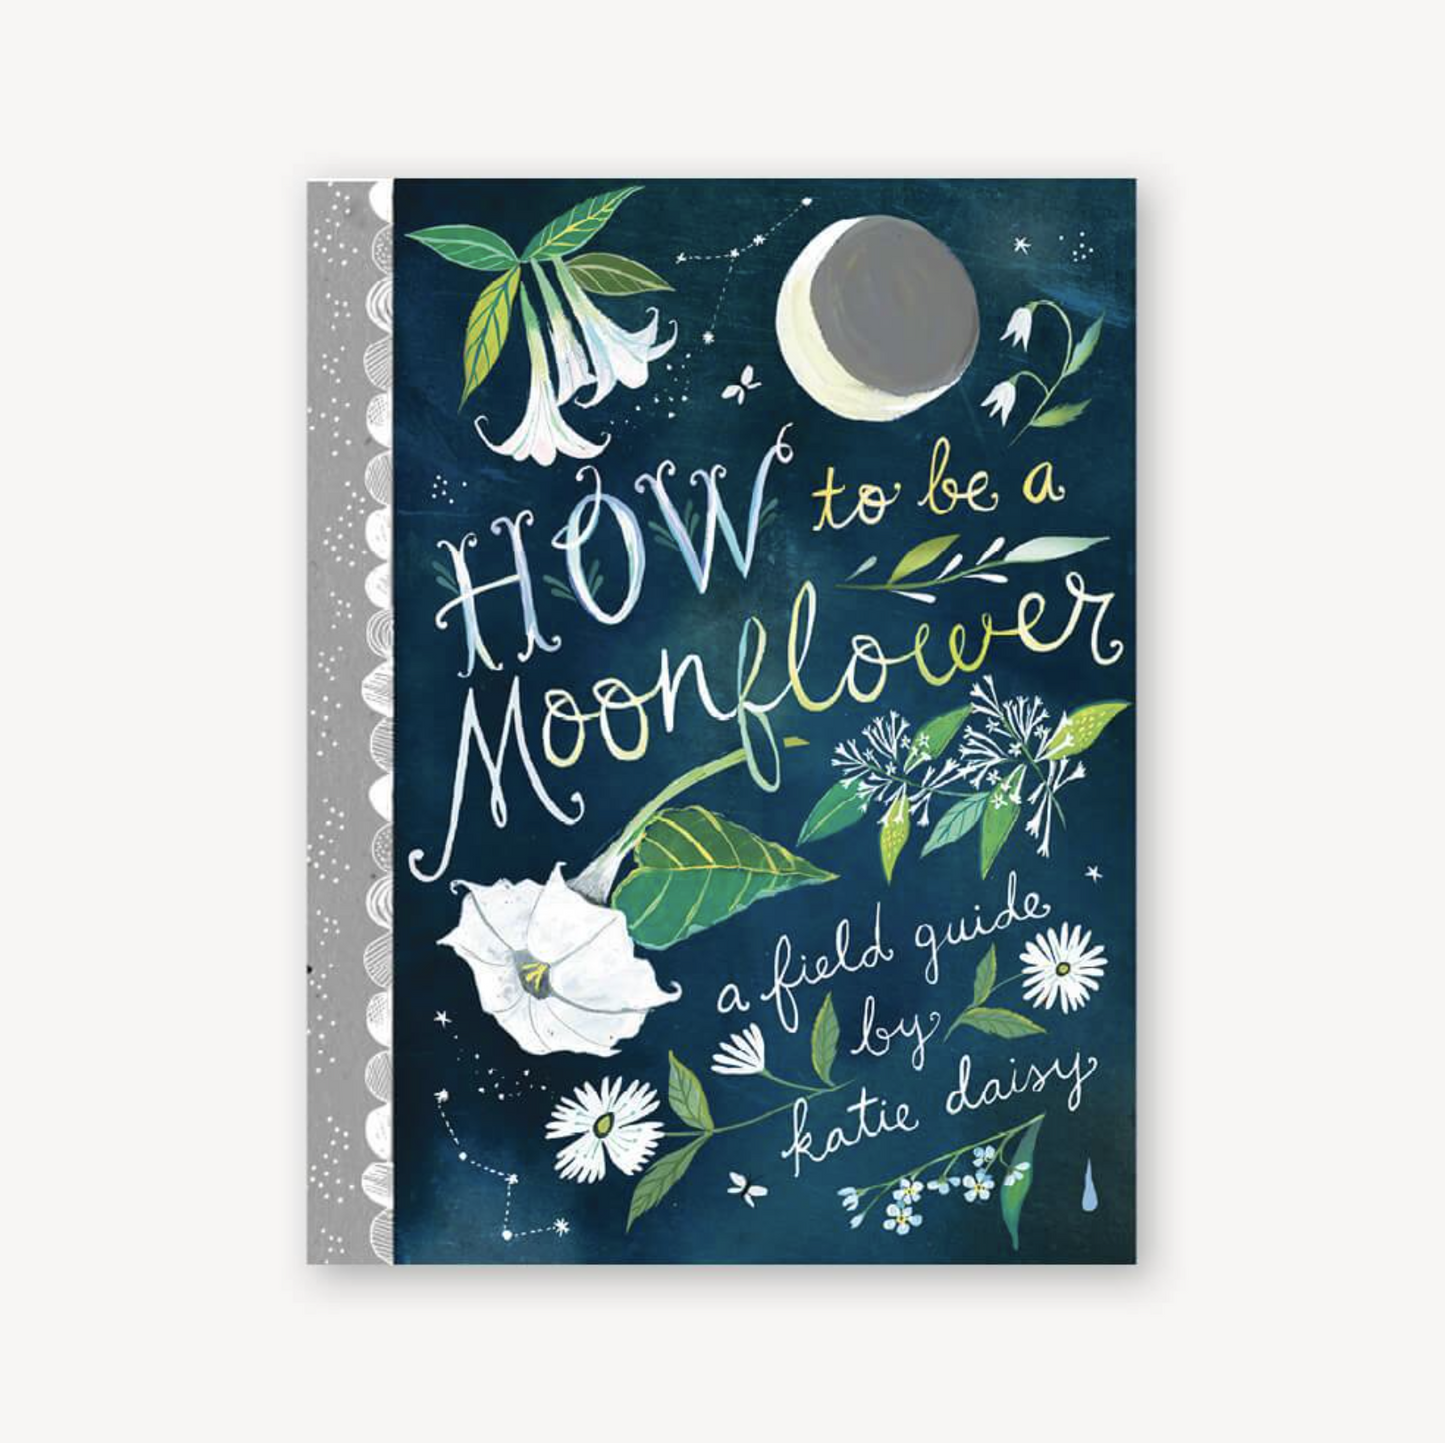 How To Be a Moonflower